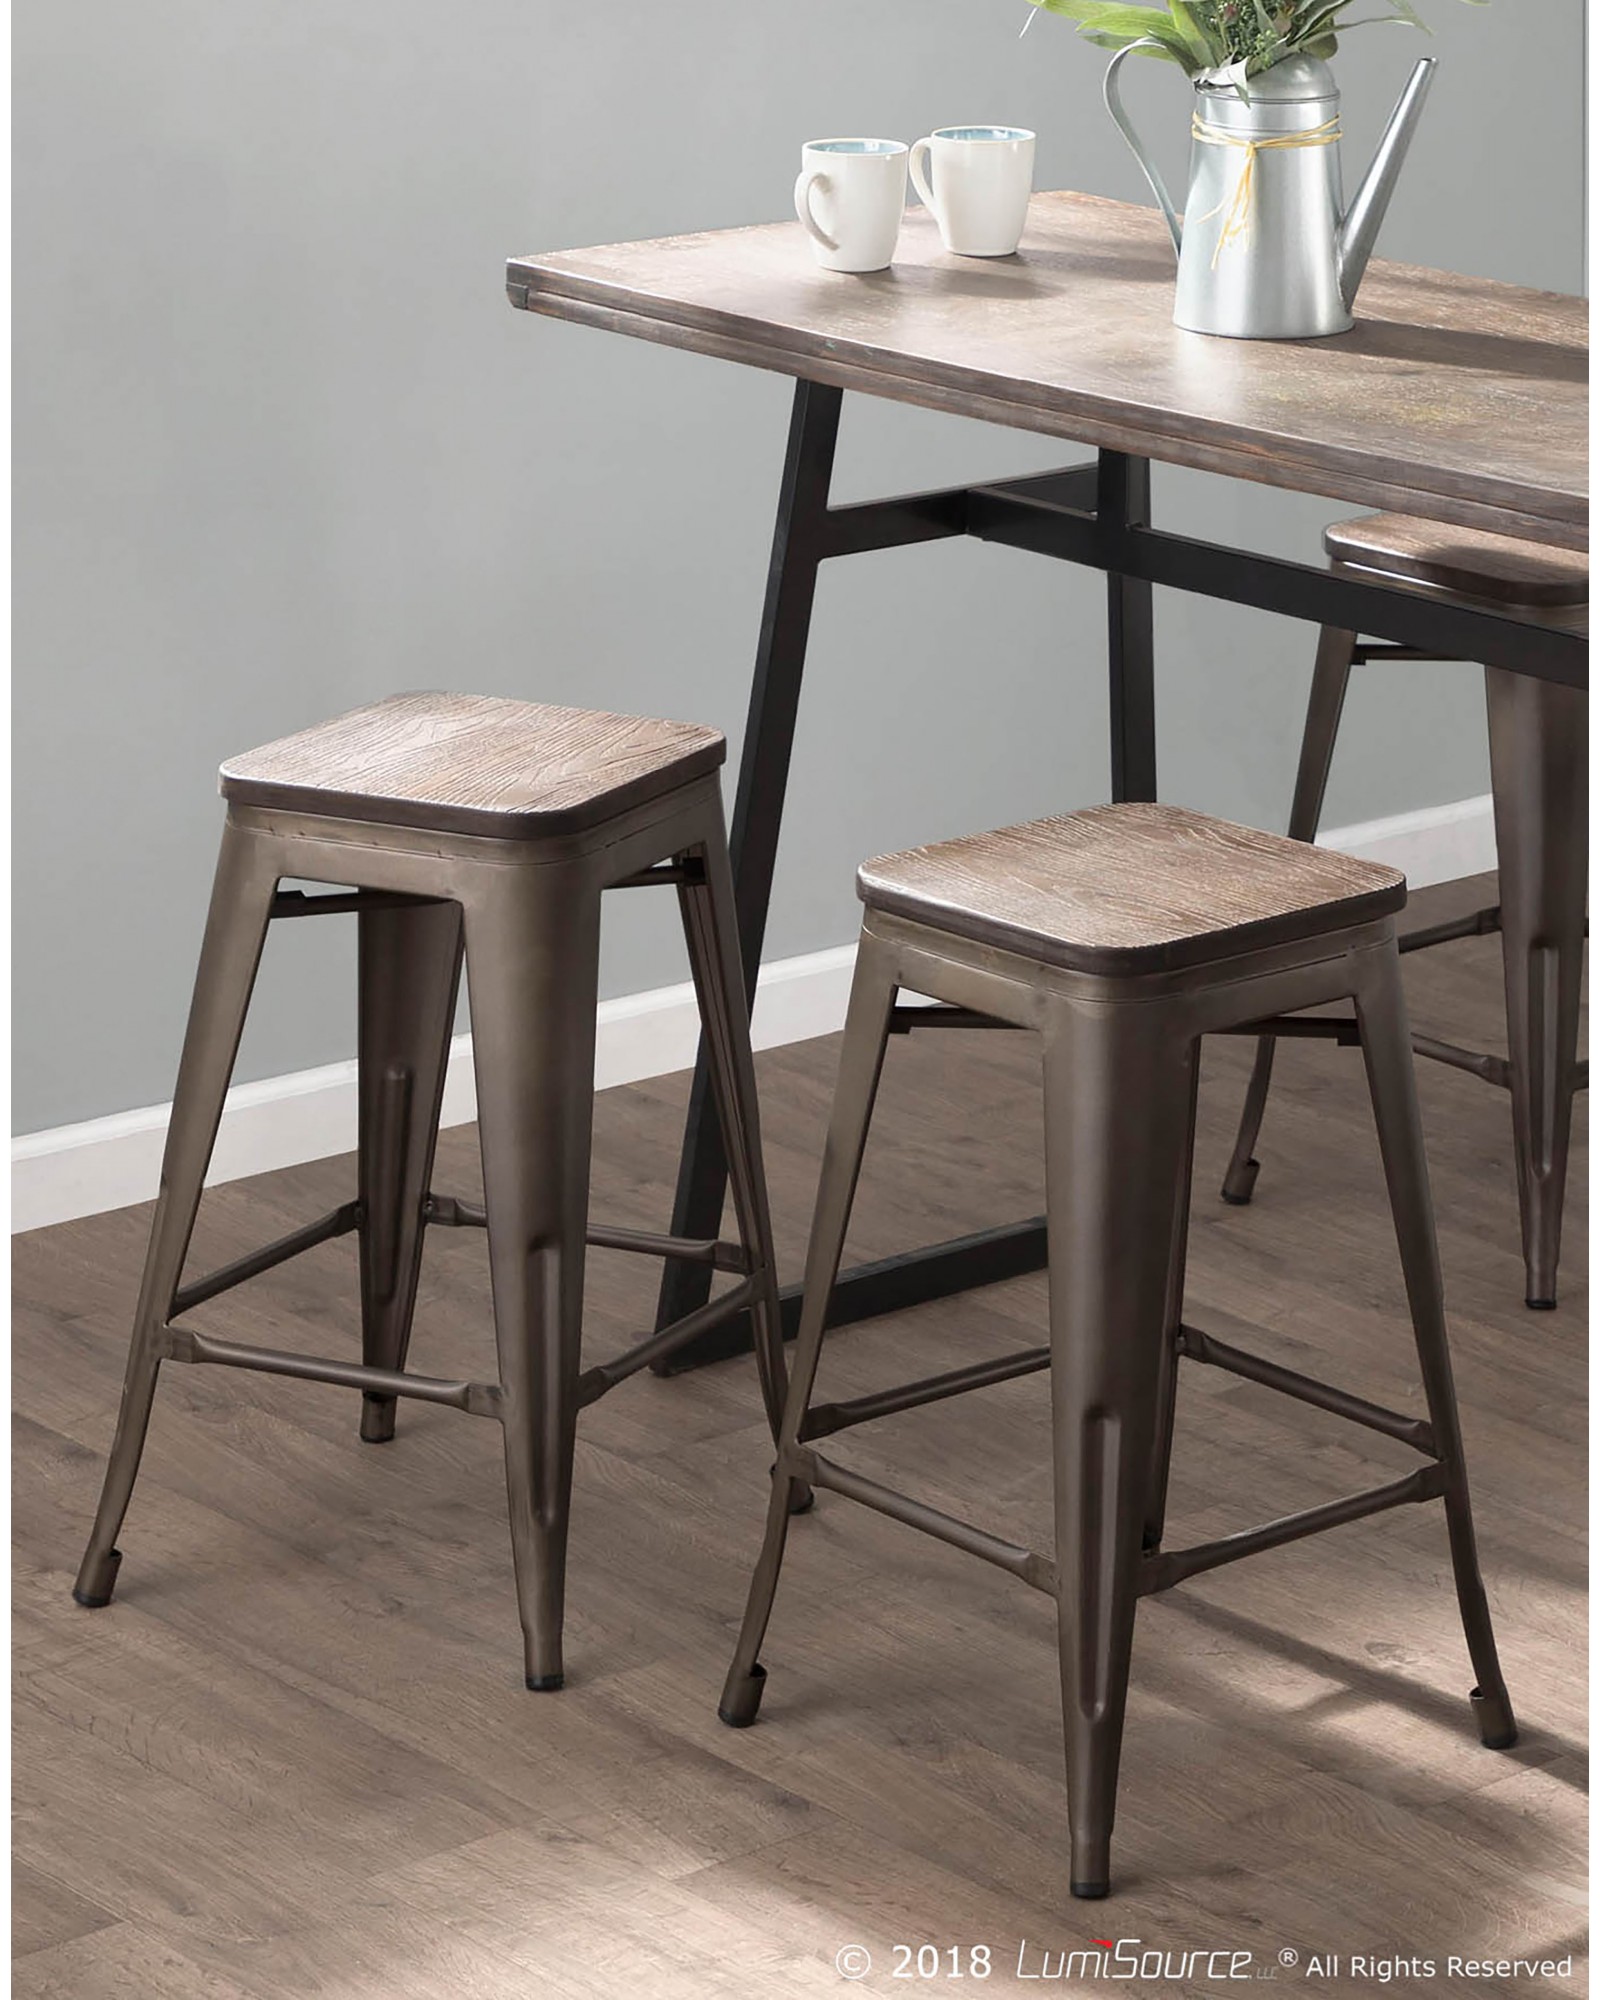 Oregon Industrial Stackable Counter Stool in Antique and Espresso - Set of 2